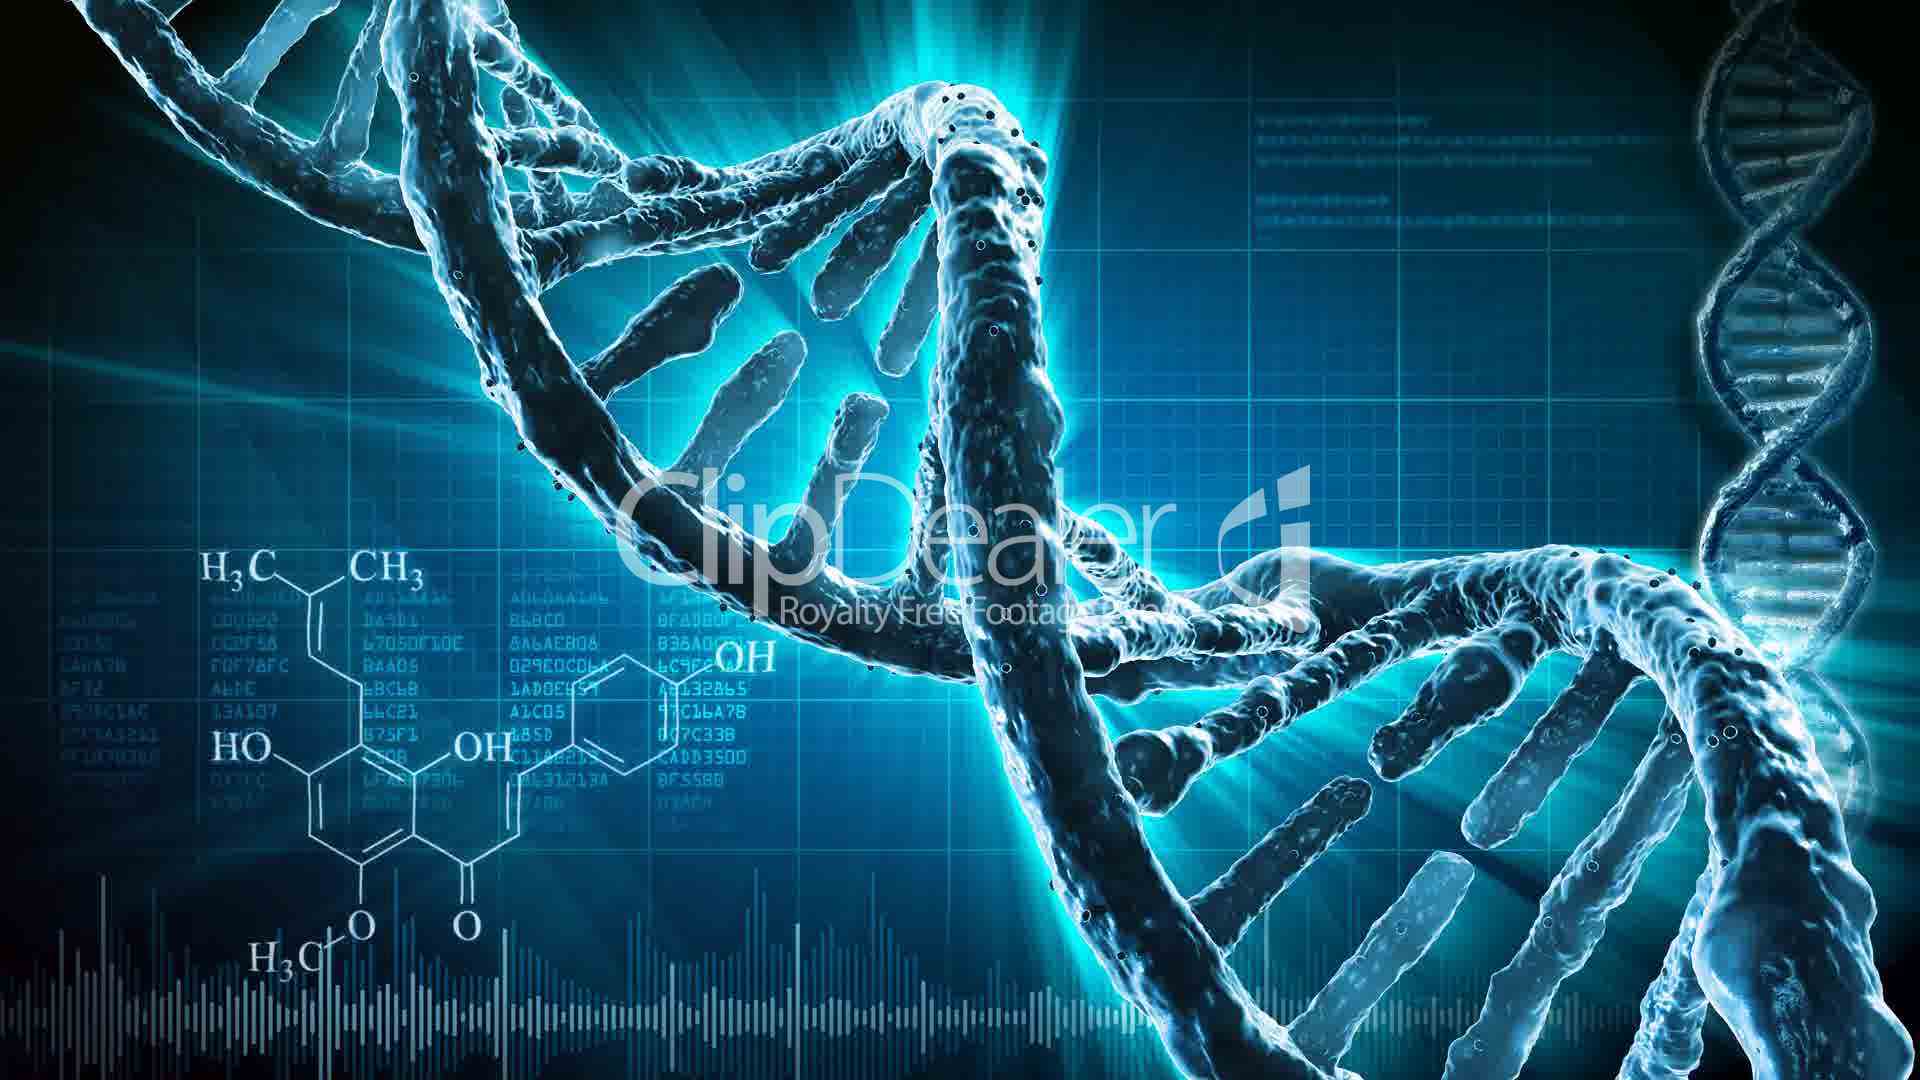 Gallery for - cool dna wallpaper